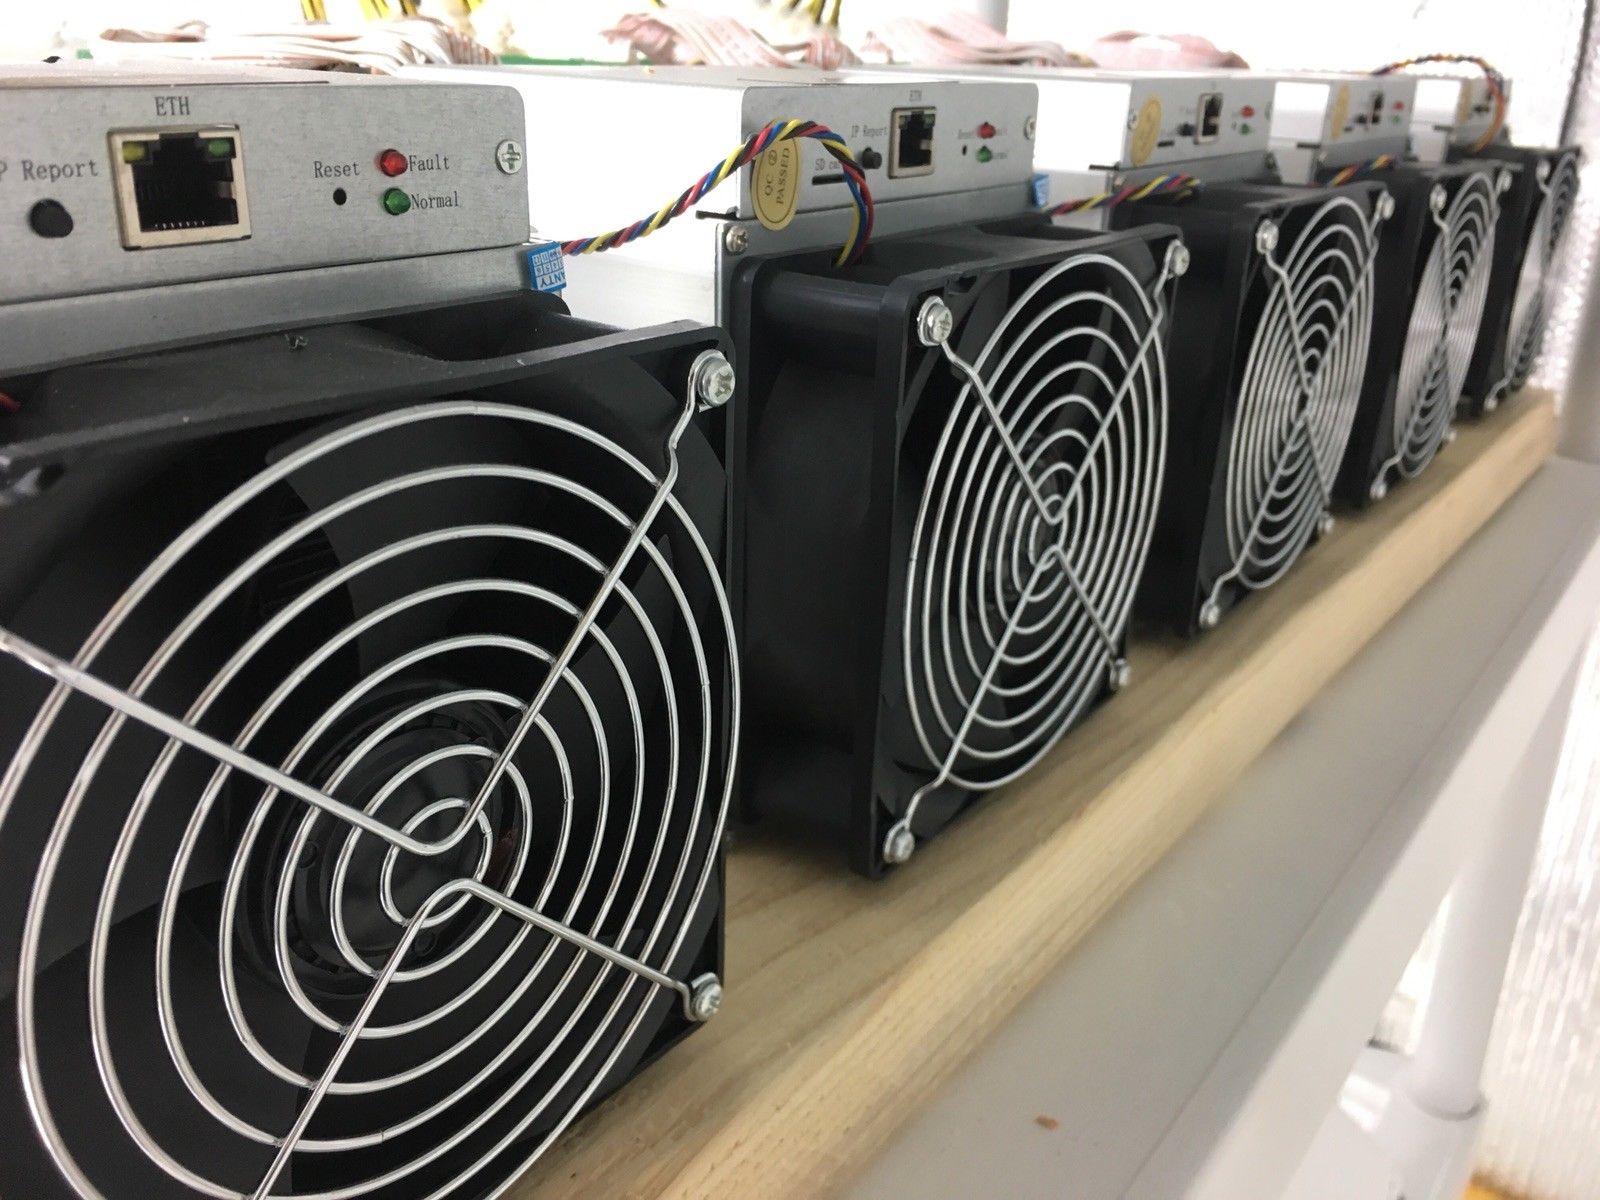 Antminer s19. Hydro ASIC Bitmain. Antminer s19 Hydro 151 th/s. ASIC новое поколение. S21 hydro 335th s